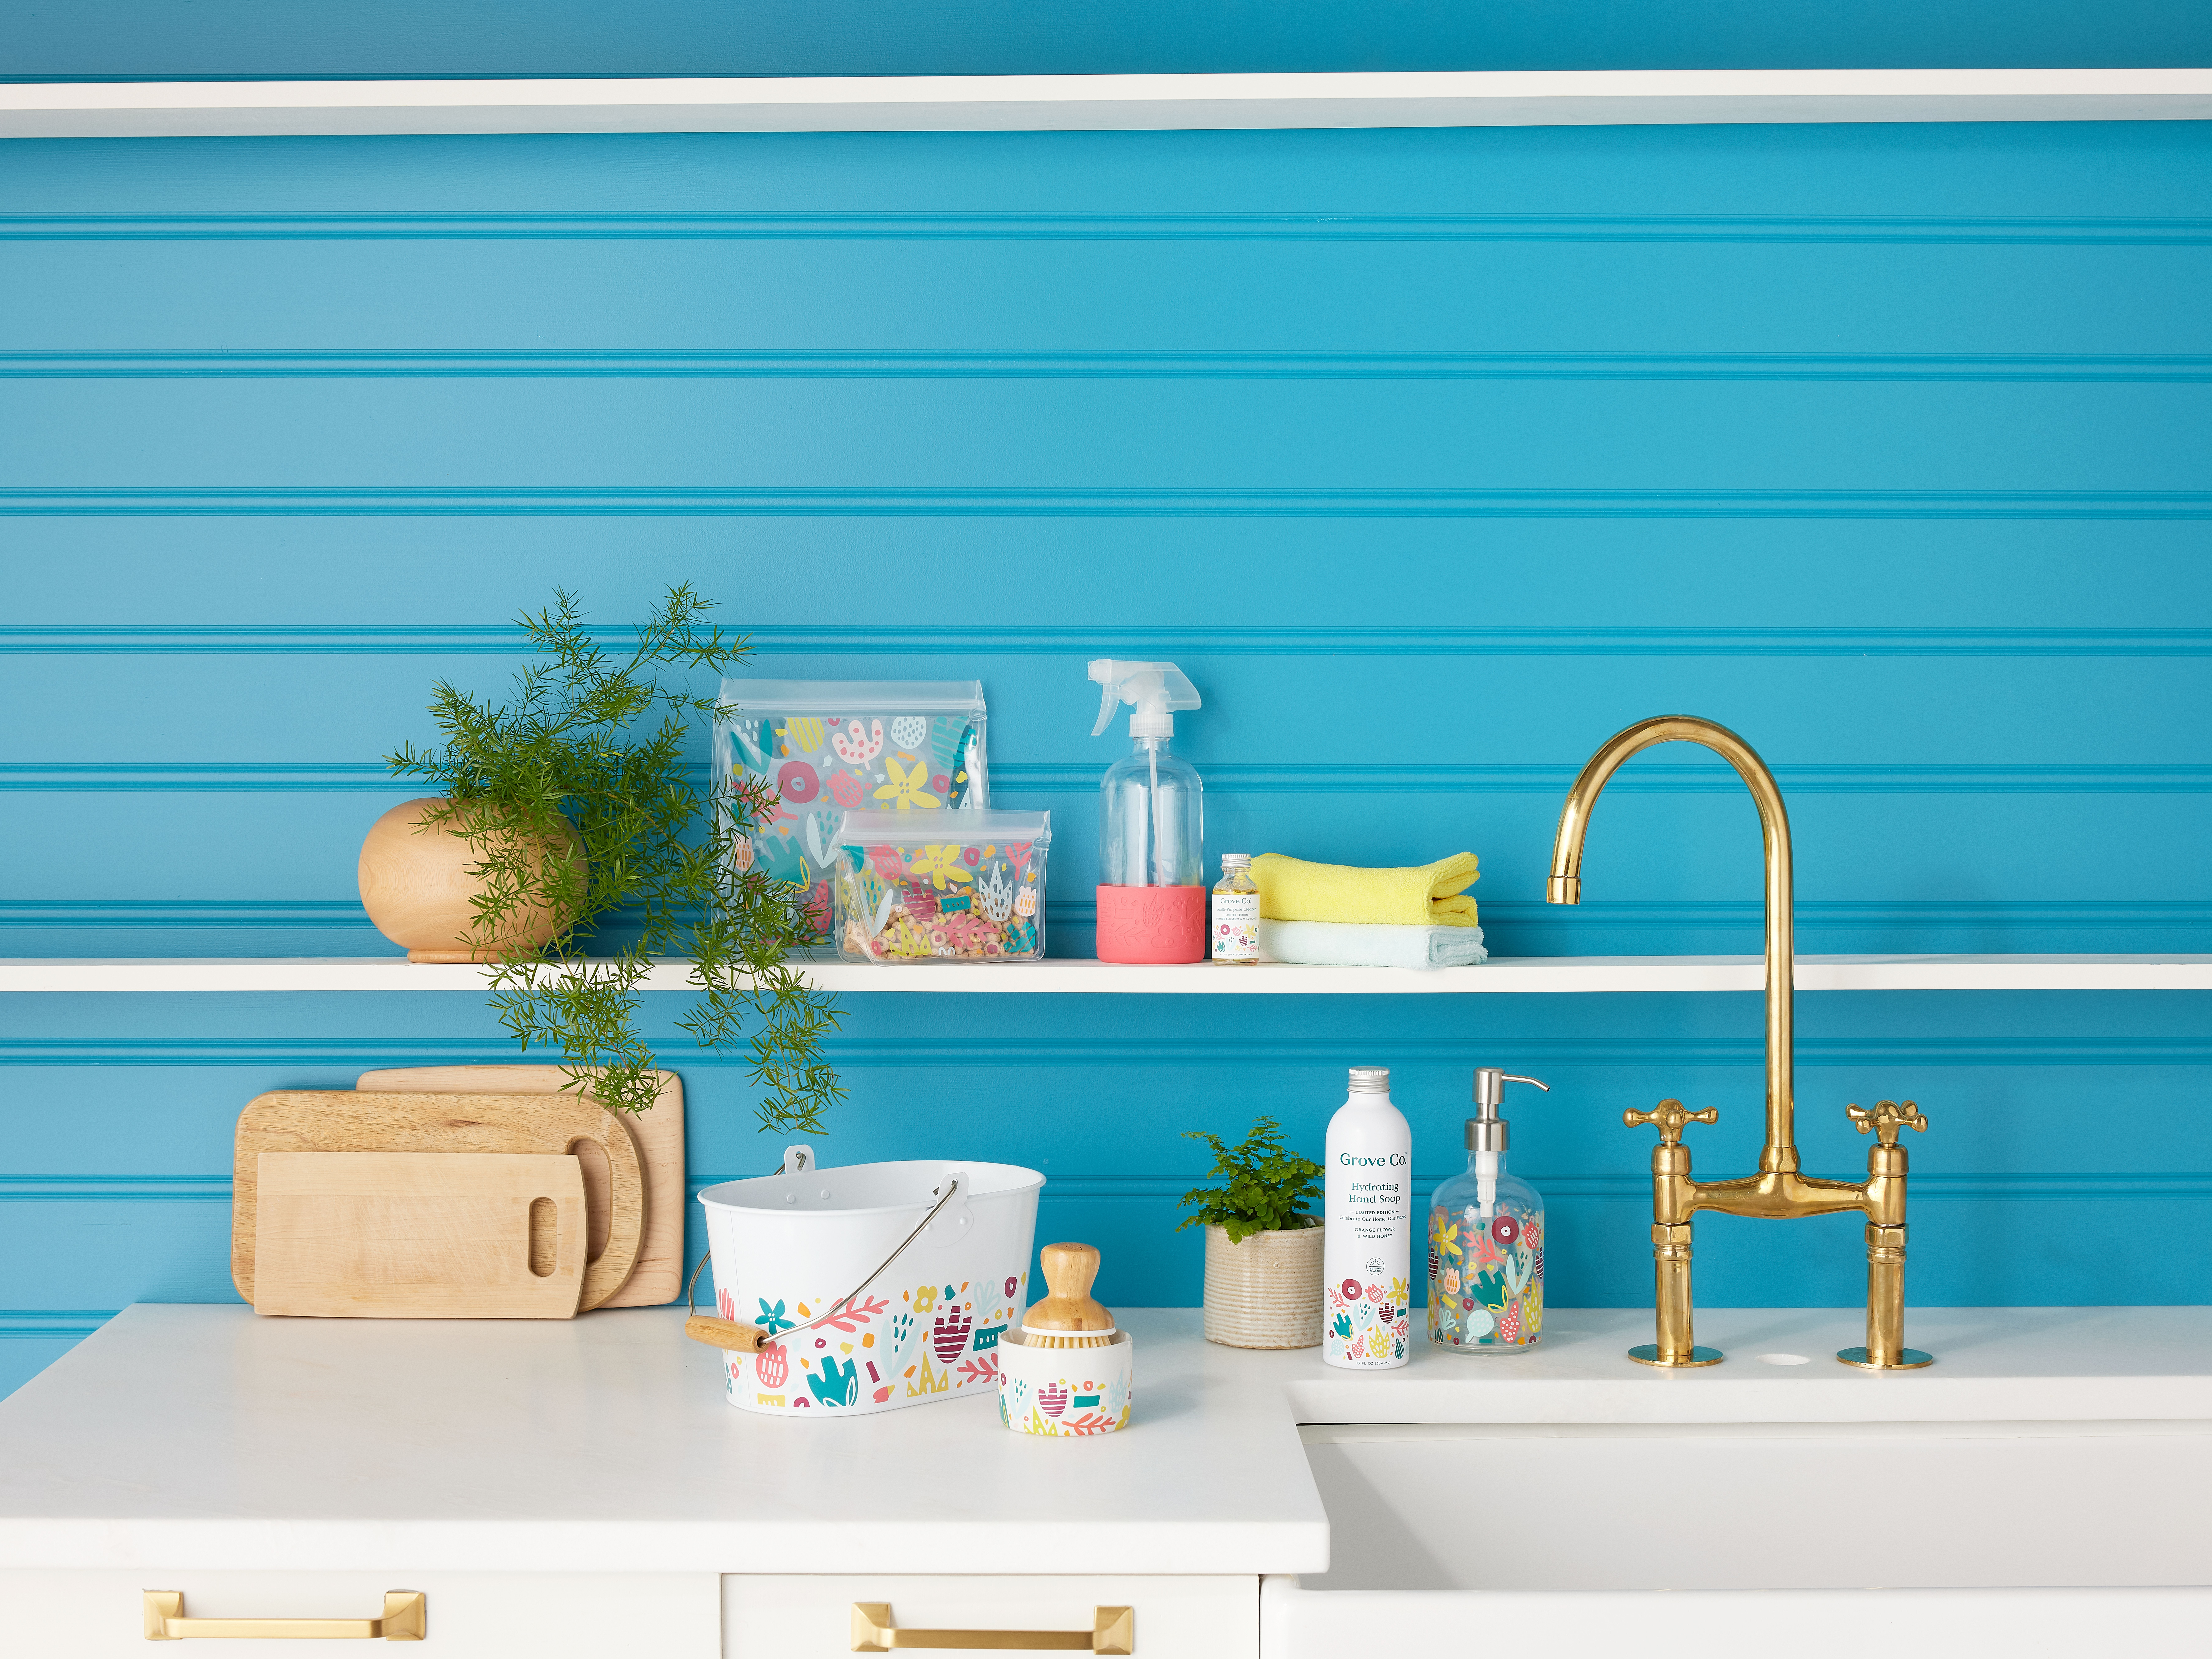 Image of blue textured wall with white shelves and cleaning products on counter below